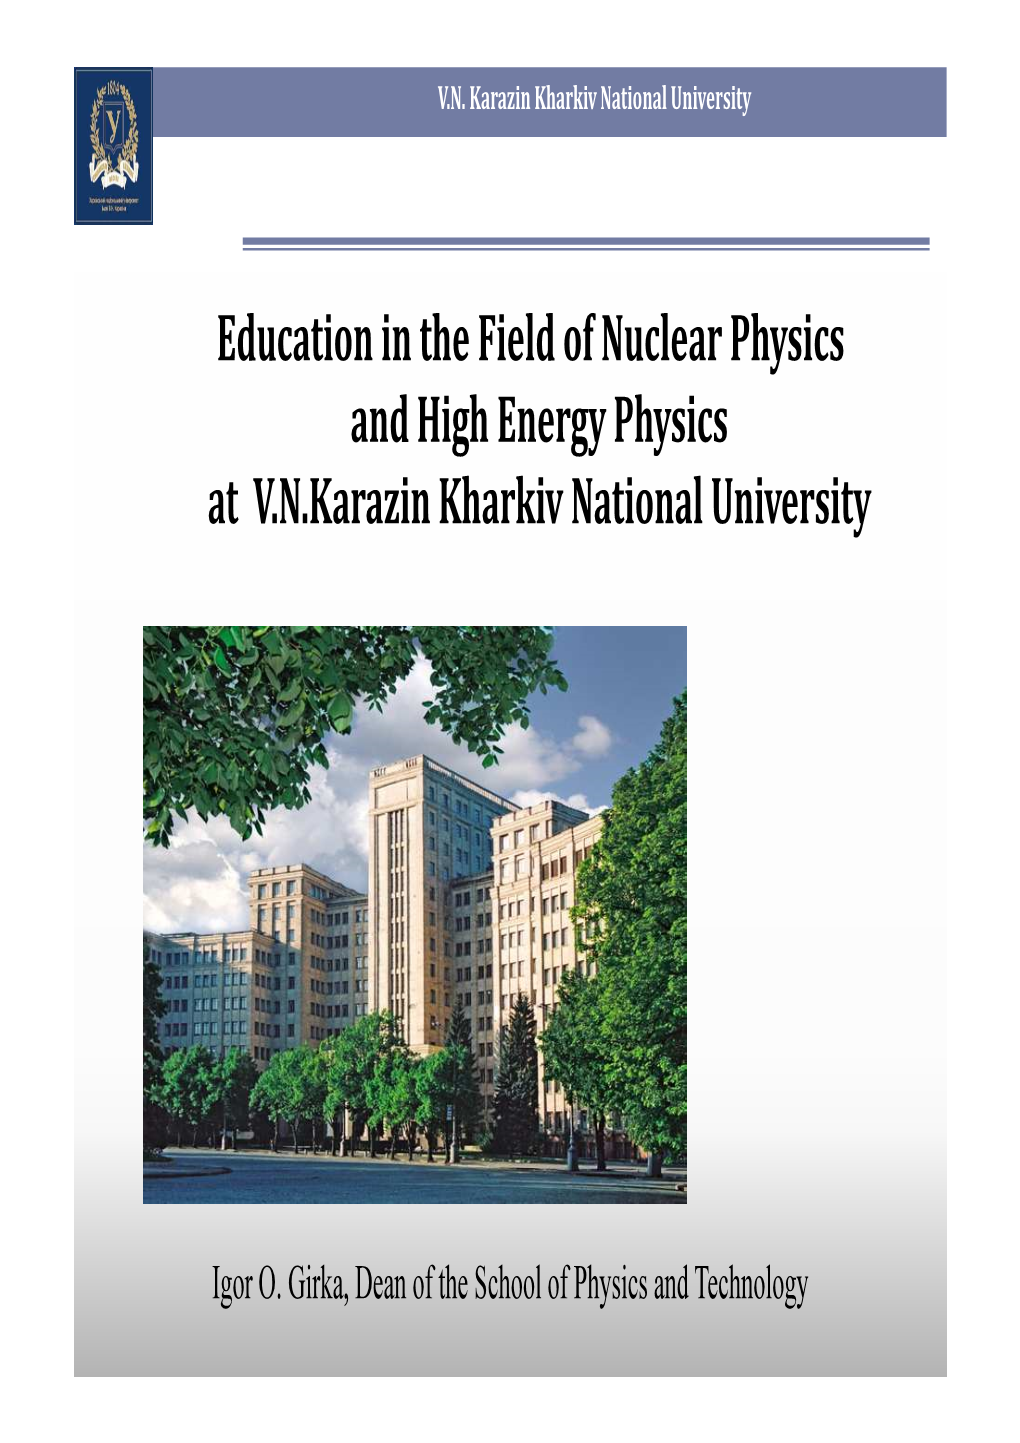 Education in the Field of Nuclear Physics and High Energy Physics at V.N.Karazin Kharkiv National University